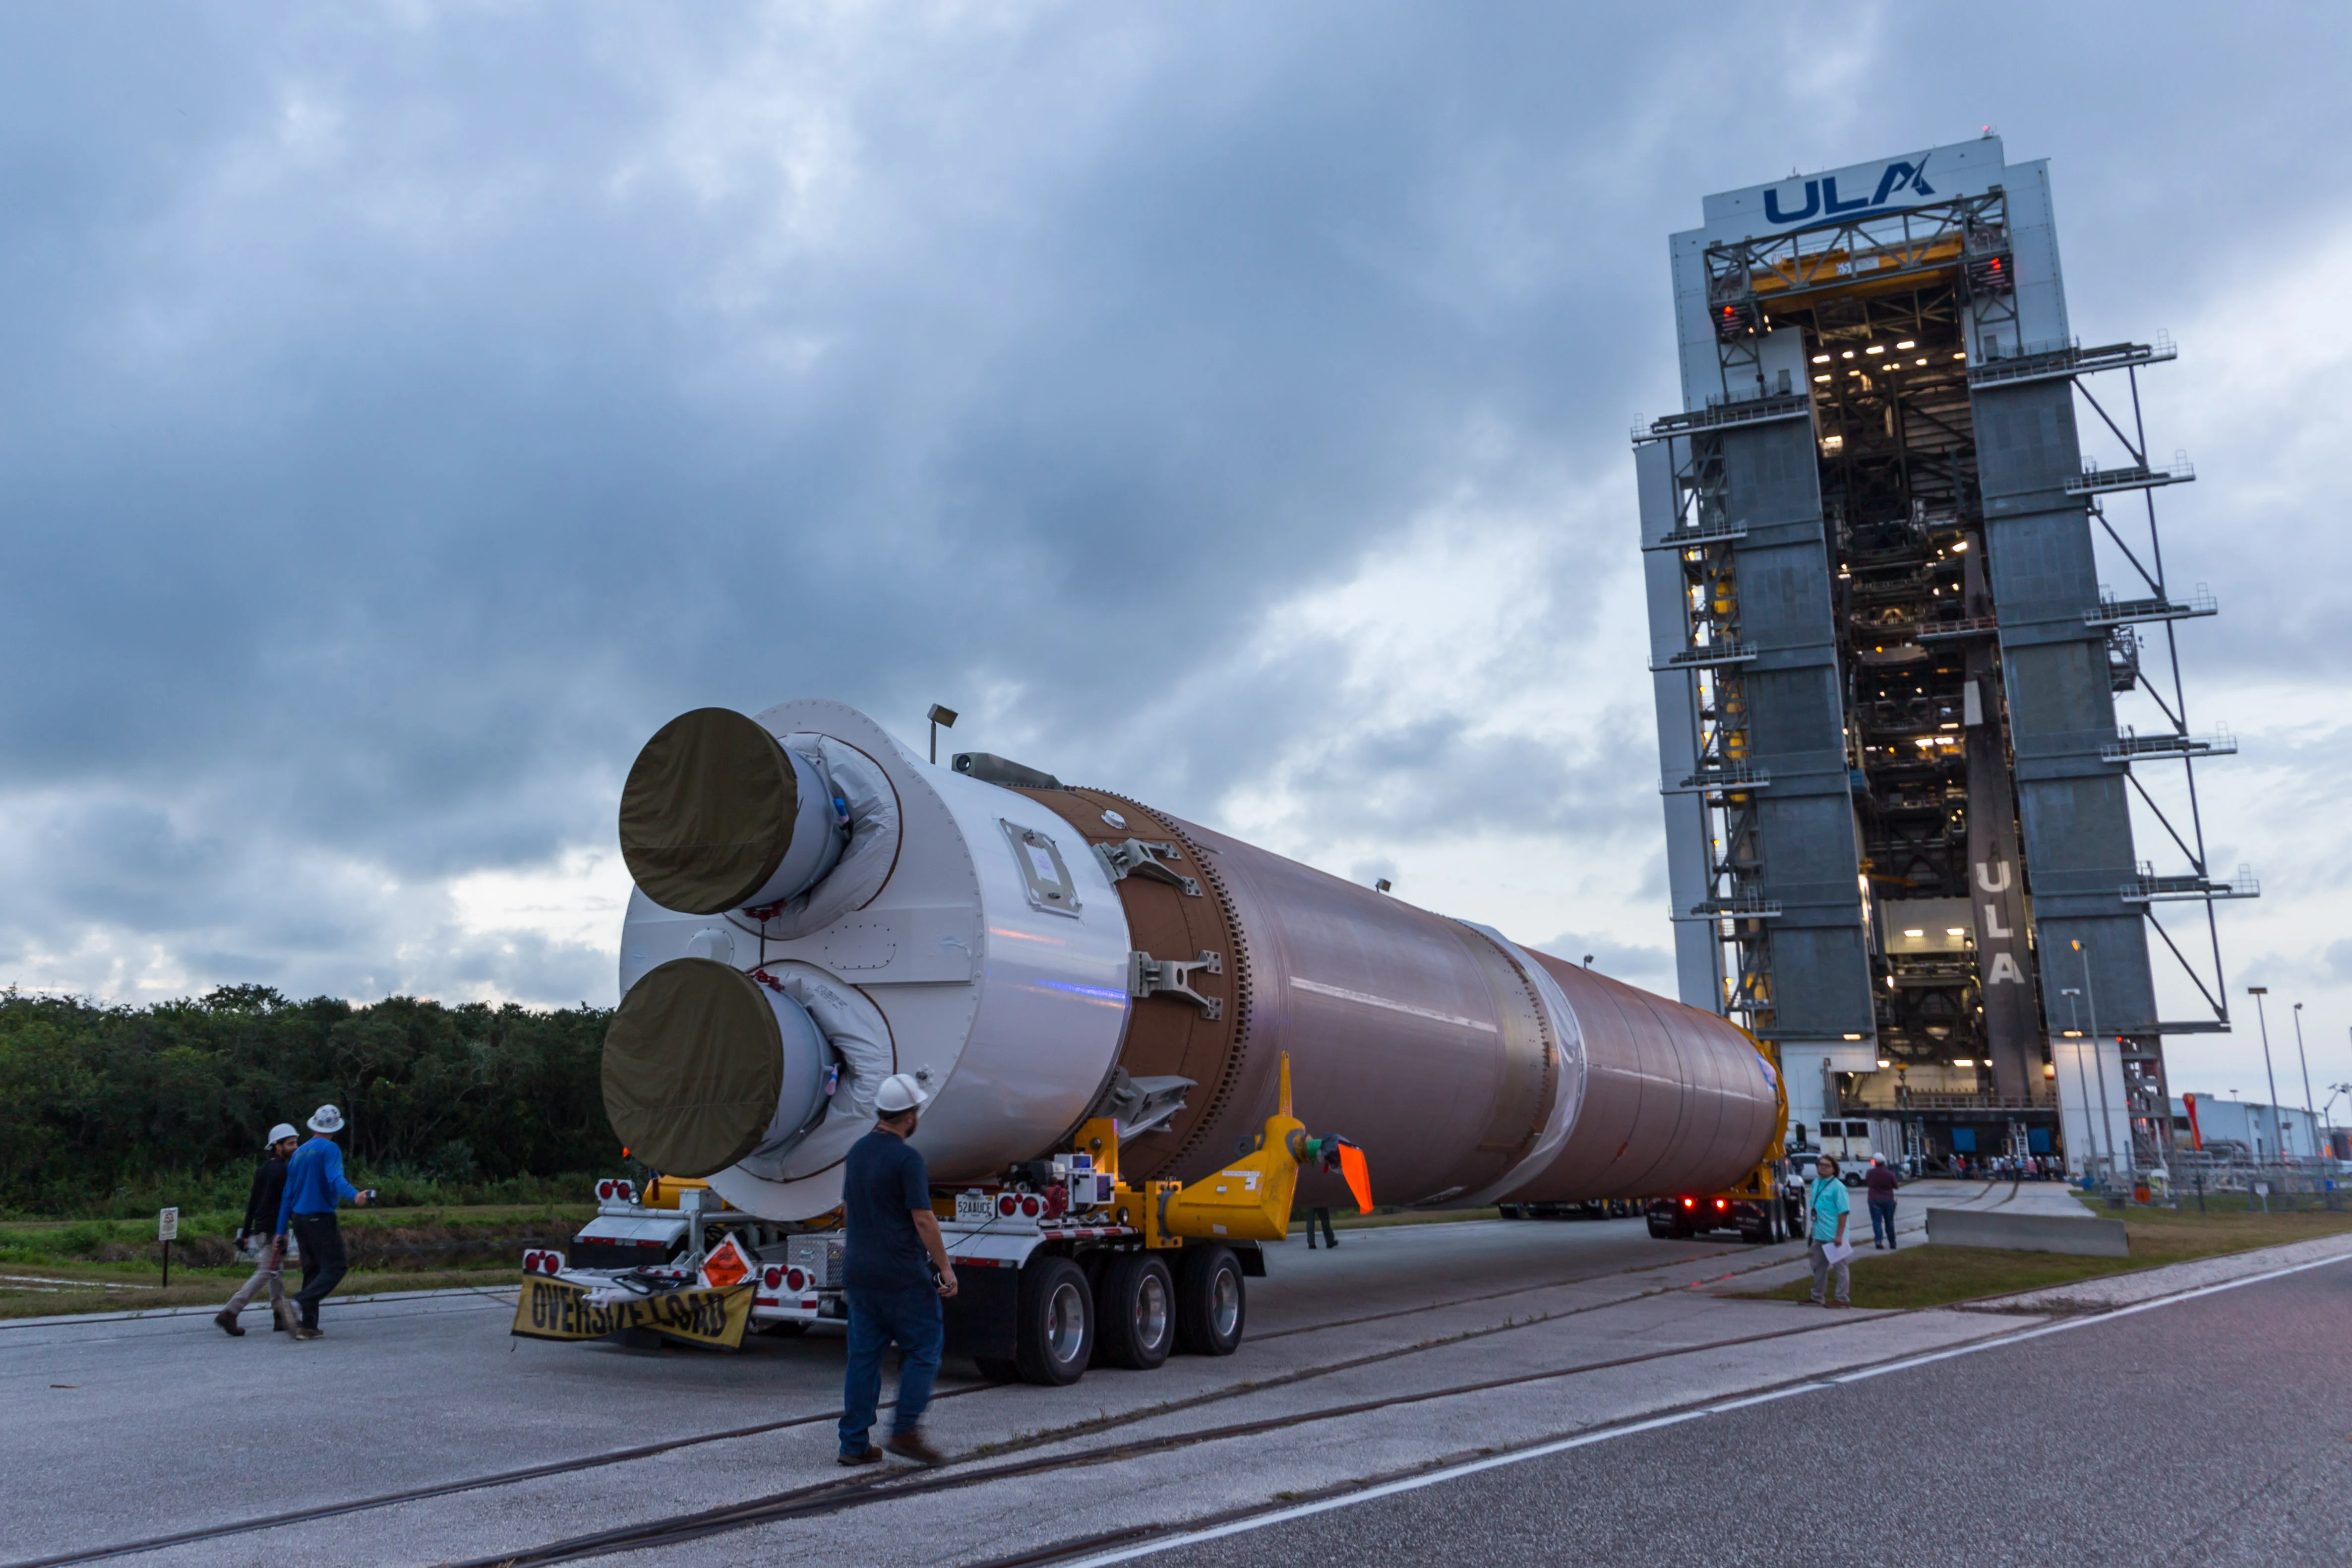 The Atlas V booster arrives at the VIF. Photo by United Launch Alliance